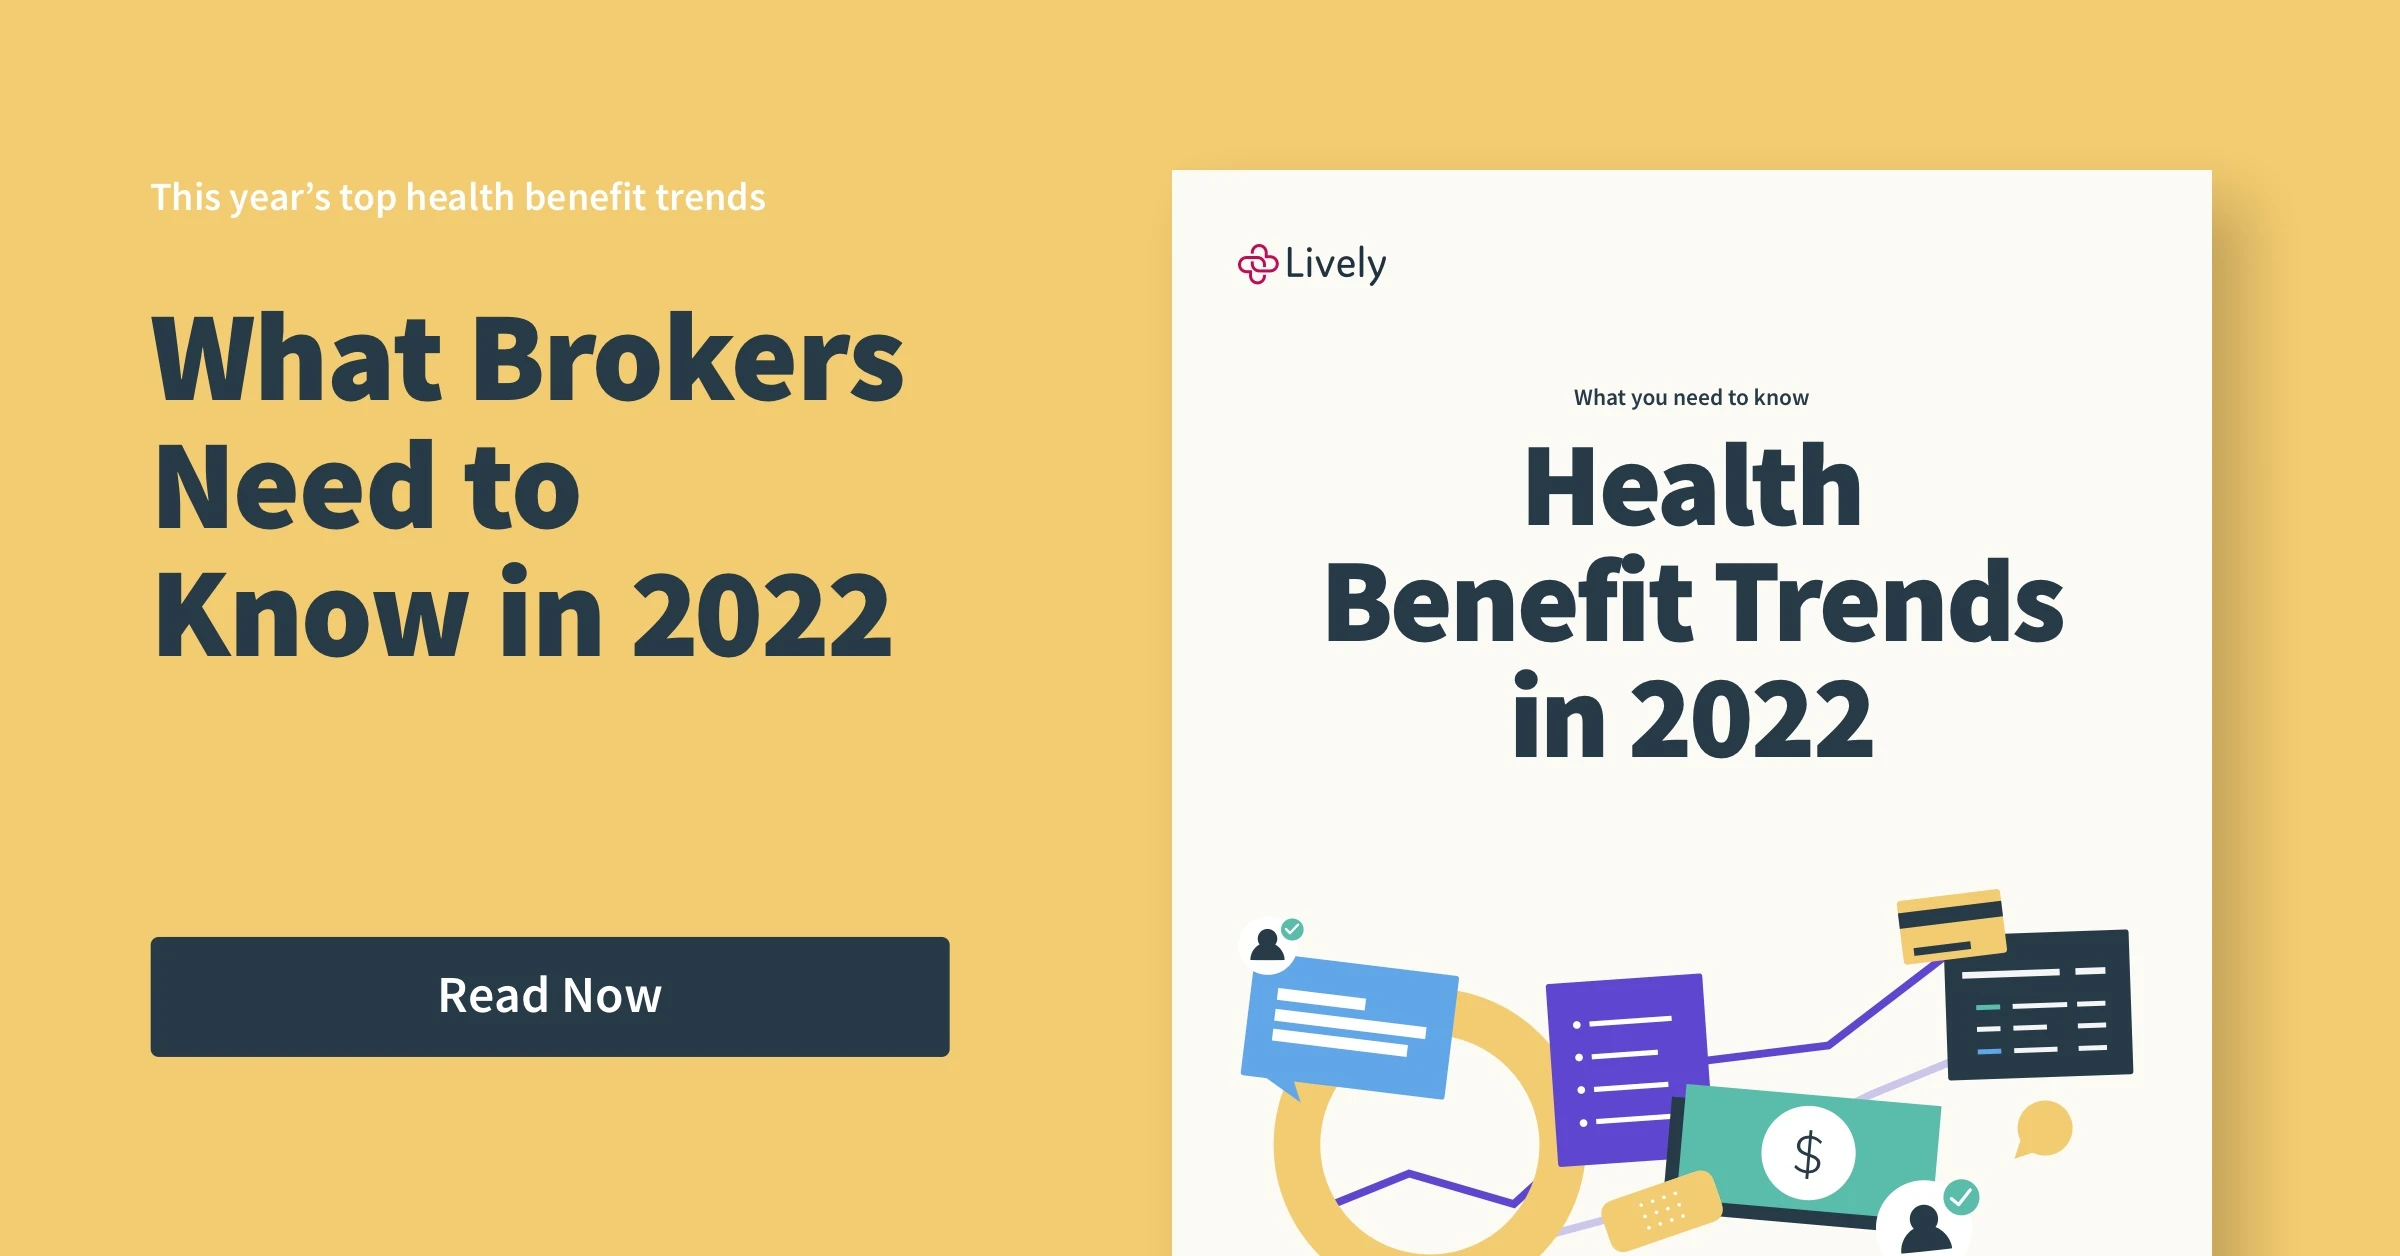 What Brokers Need to know in 2022 Download Trends Report